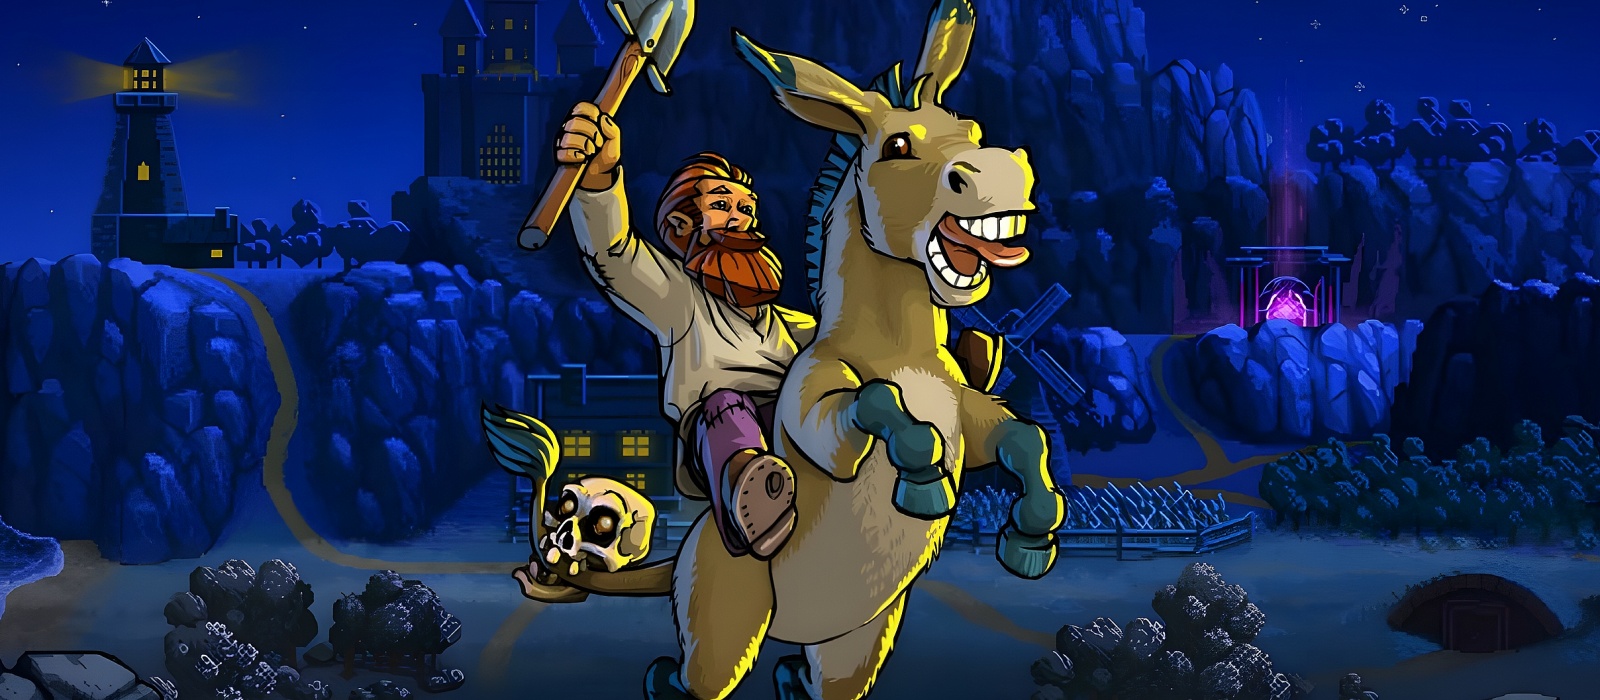 Where are the sins and how to use remote control in Graveyard Keeper - Better Save Soul